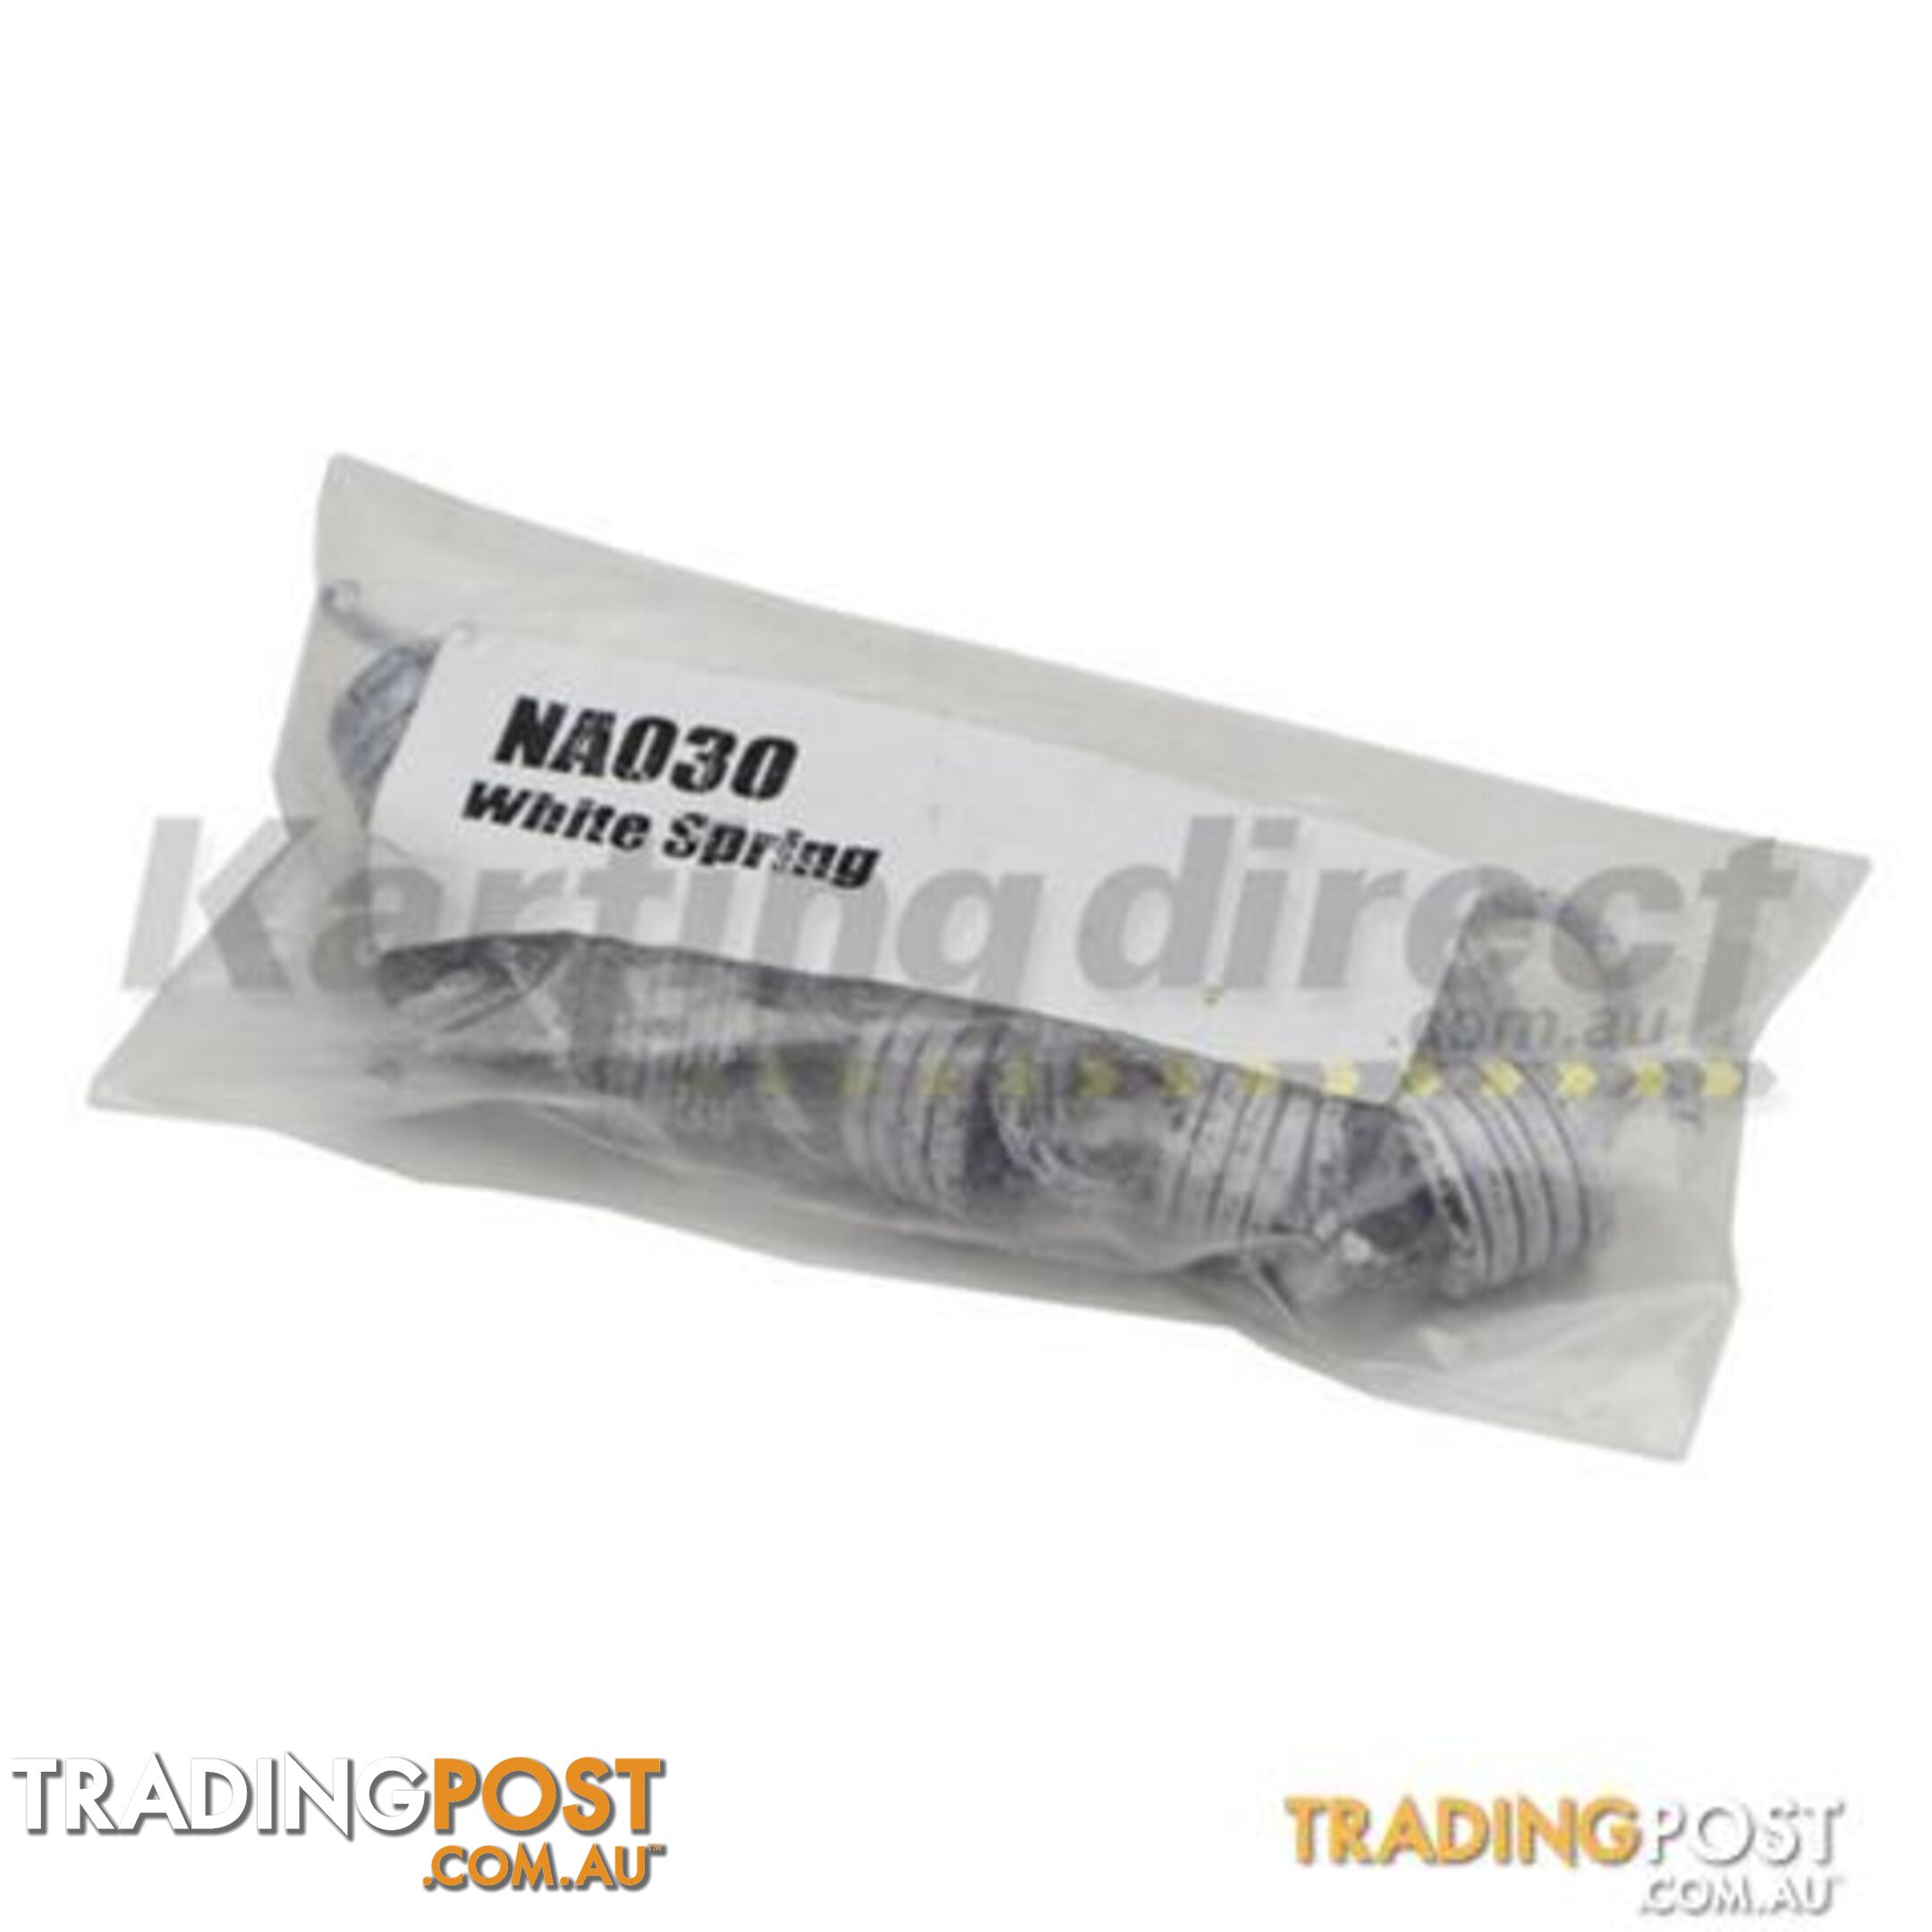 Go Kart Clutch Springs NORAM White RPM Approx 3900 RPM NA030 - ALL BRAND NEW !!!